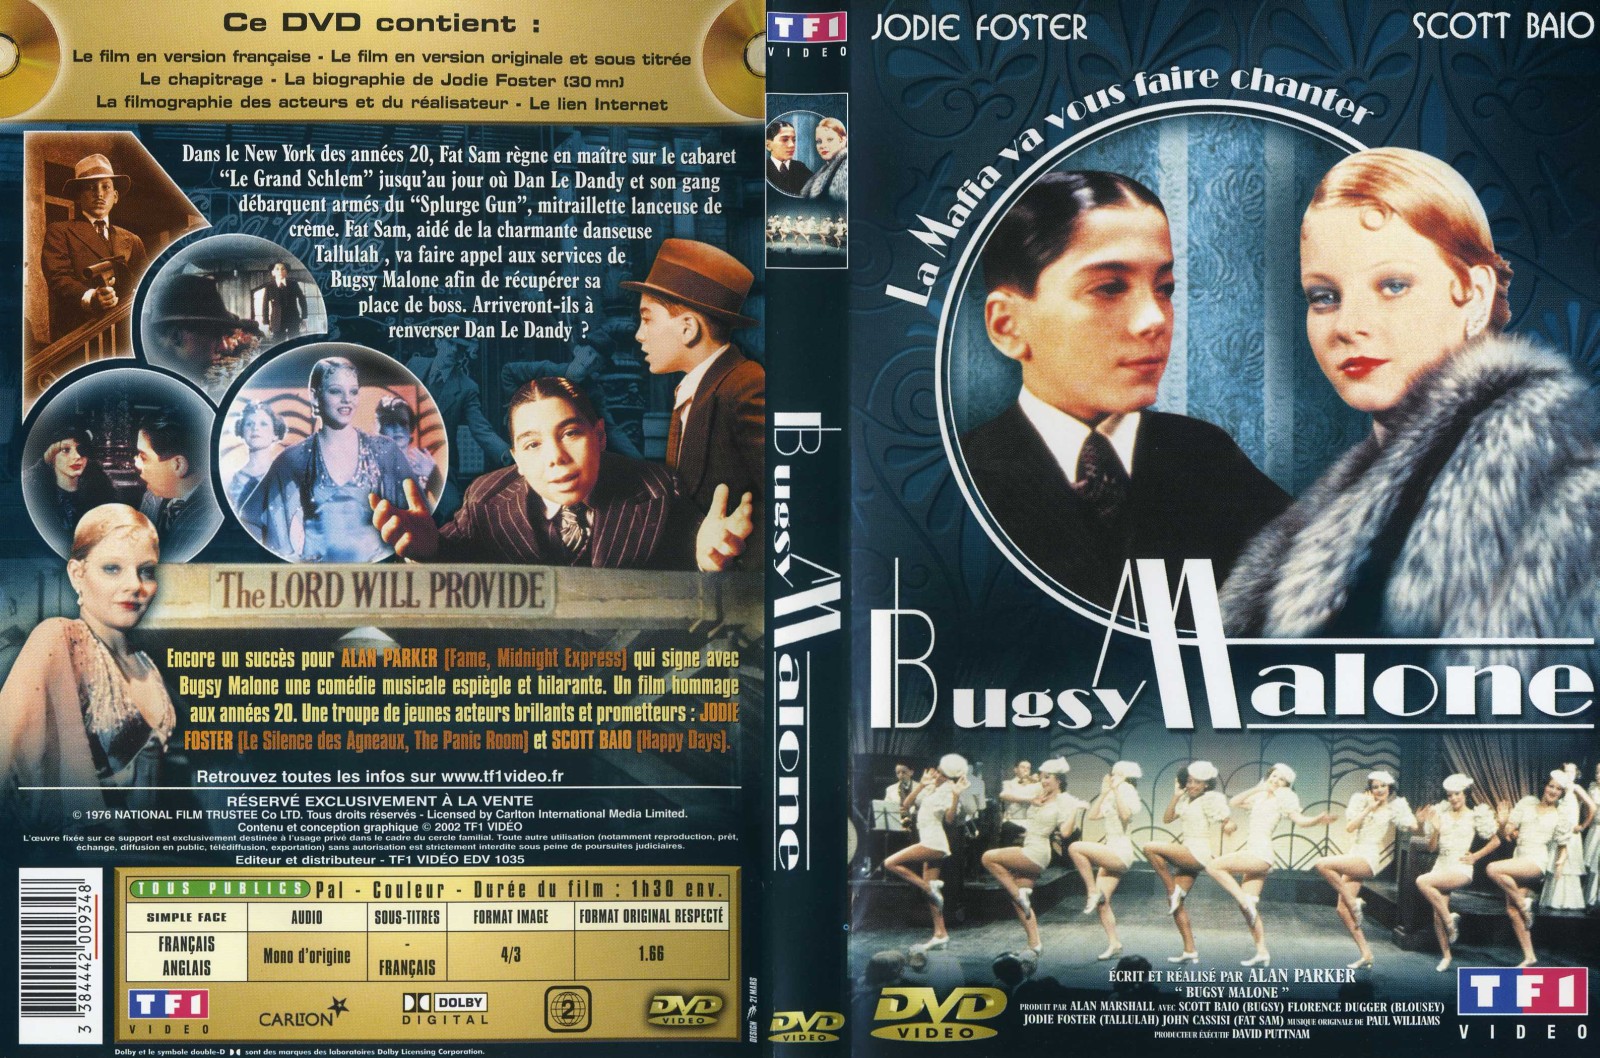 Jaquette DVD Bugsy Malone